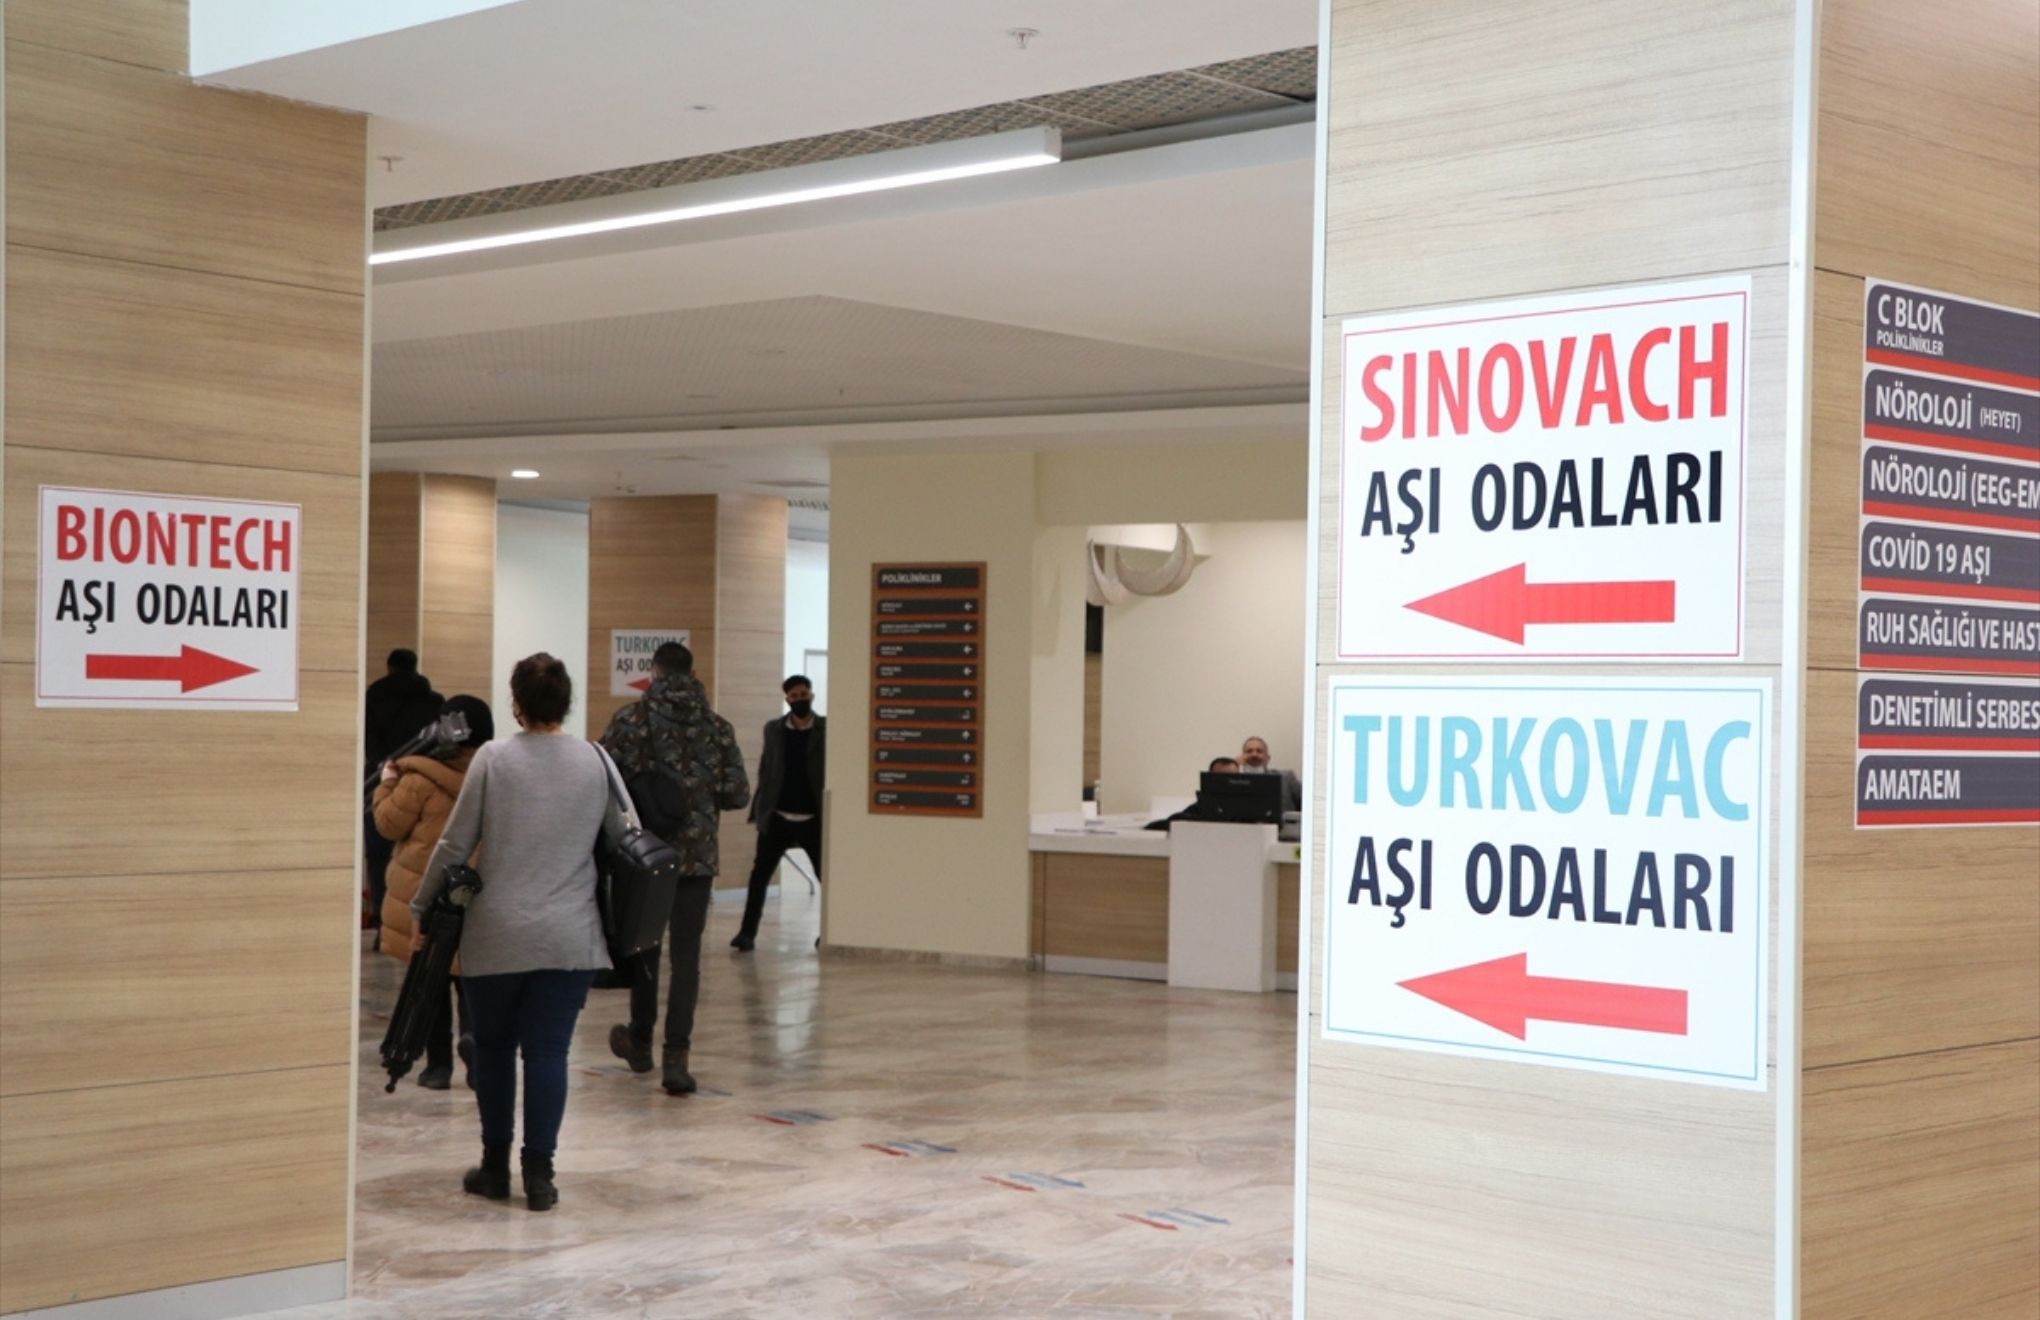 COVID-19 | Turkey reports over 37 thousand daily cases, 130 deaths